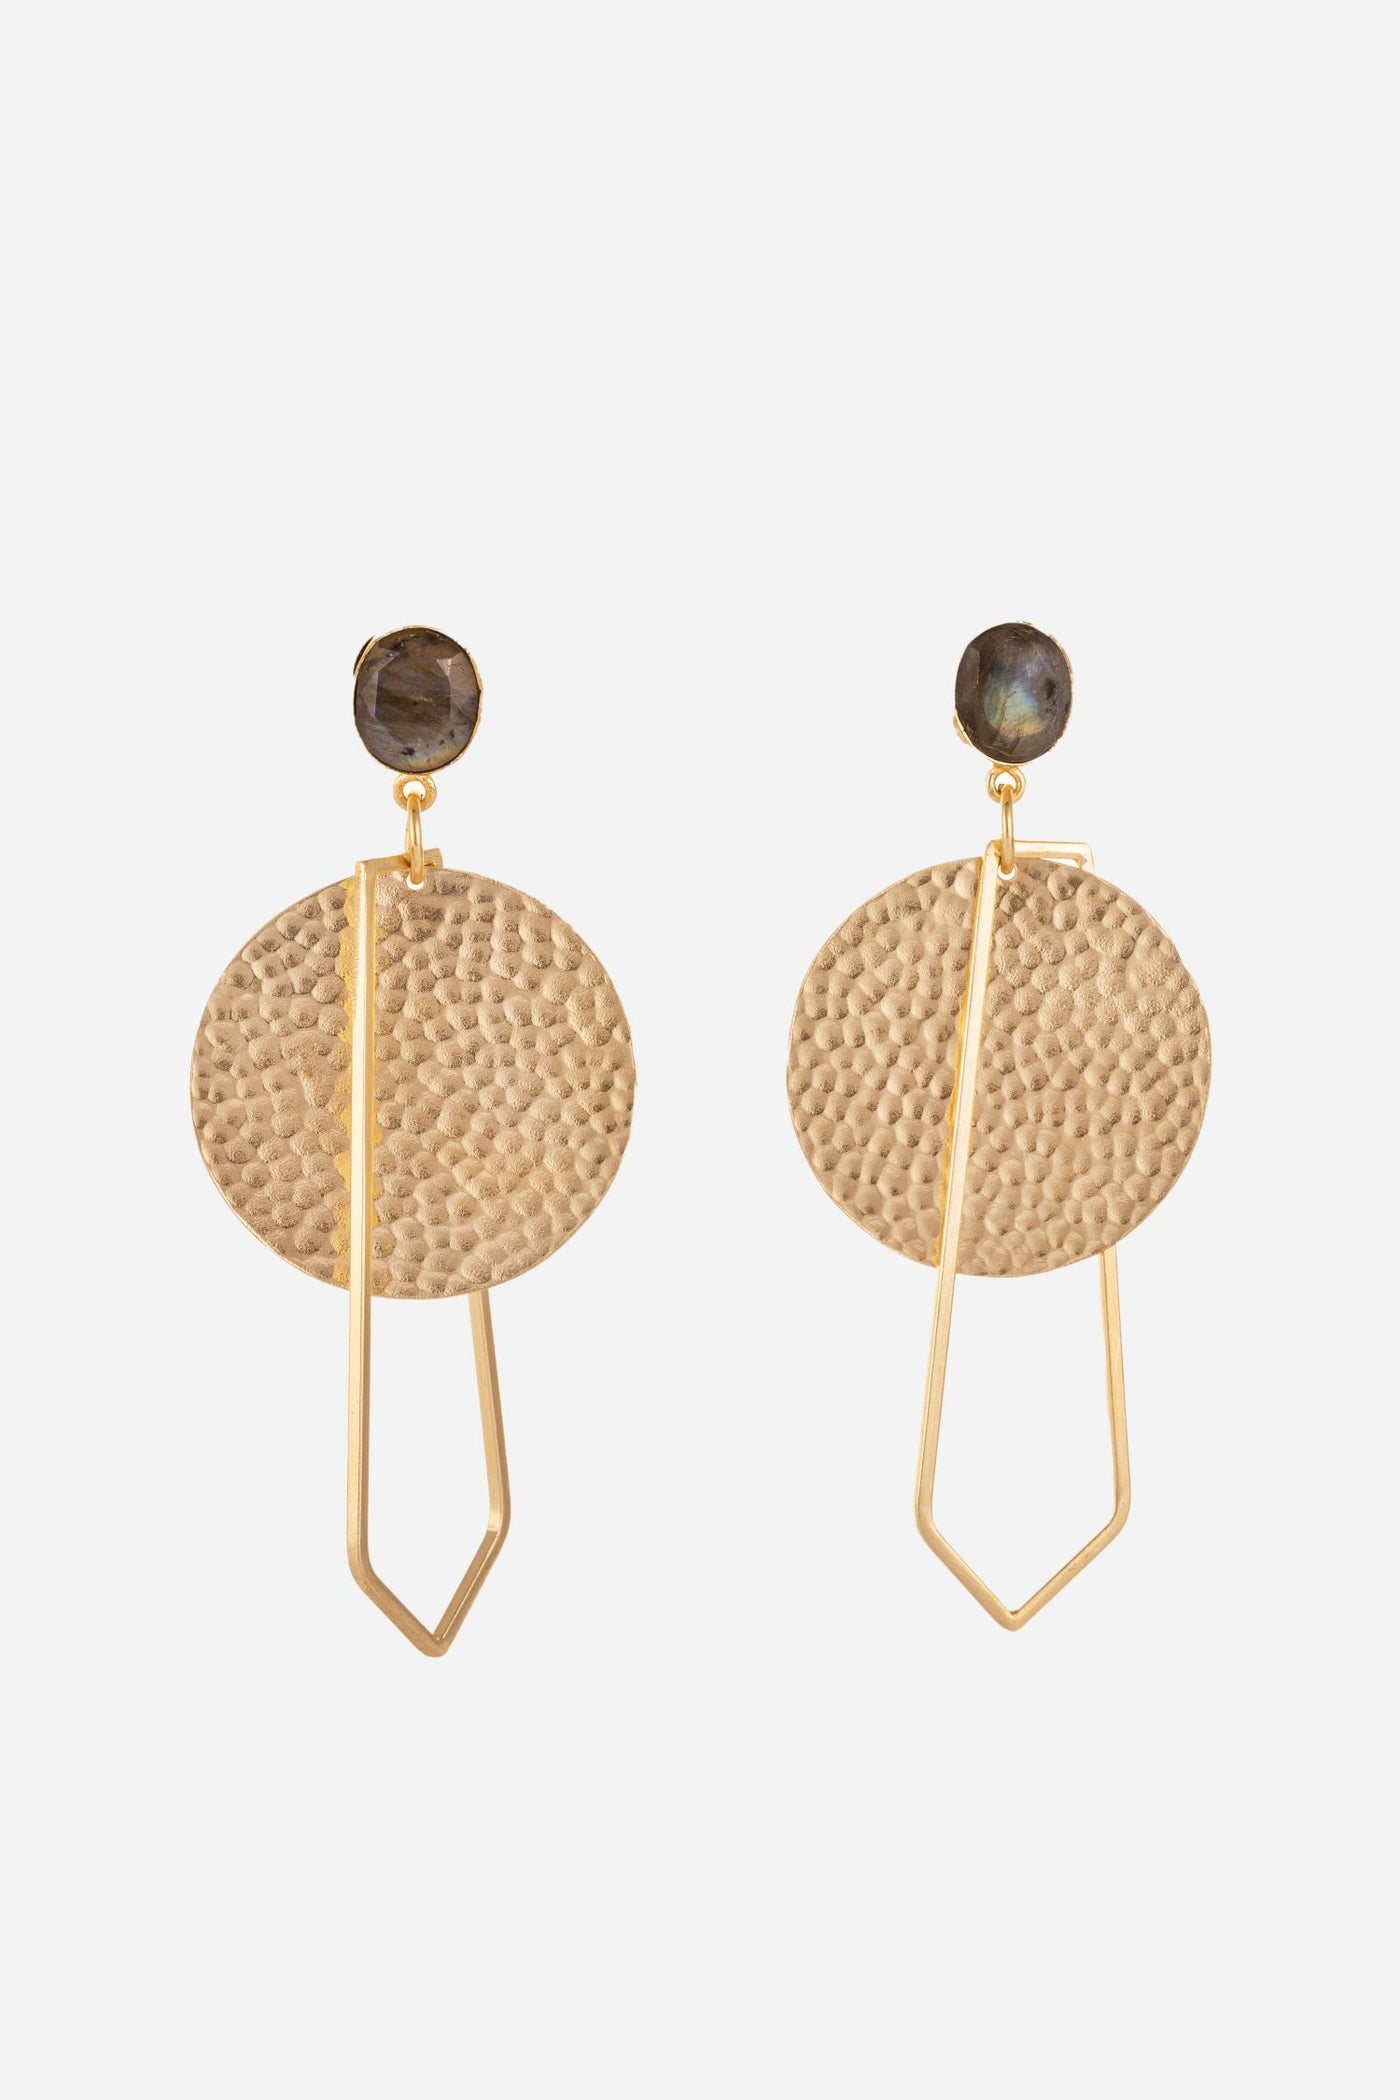 Blue Stone Tie Pin Gold Colour Earring